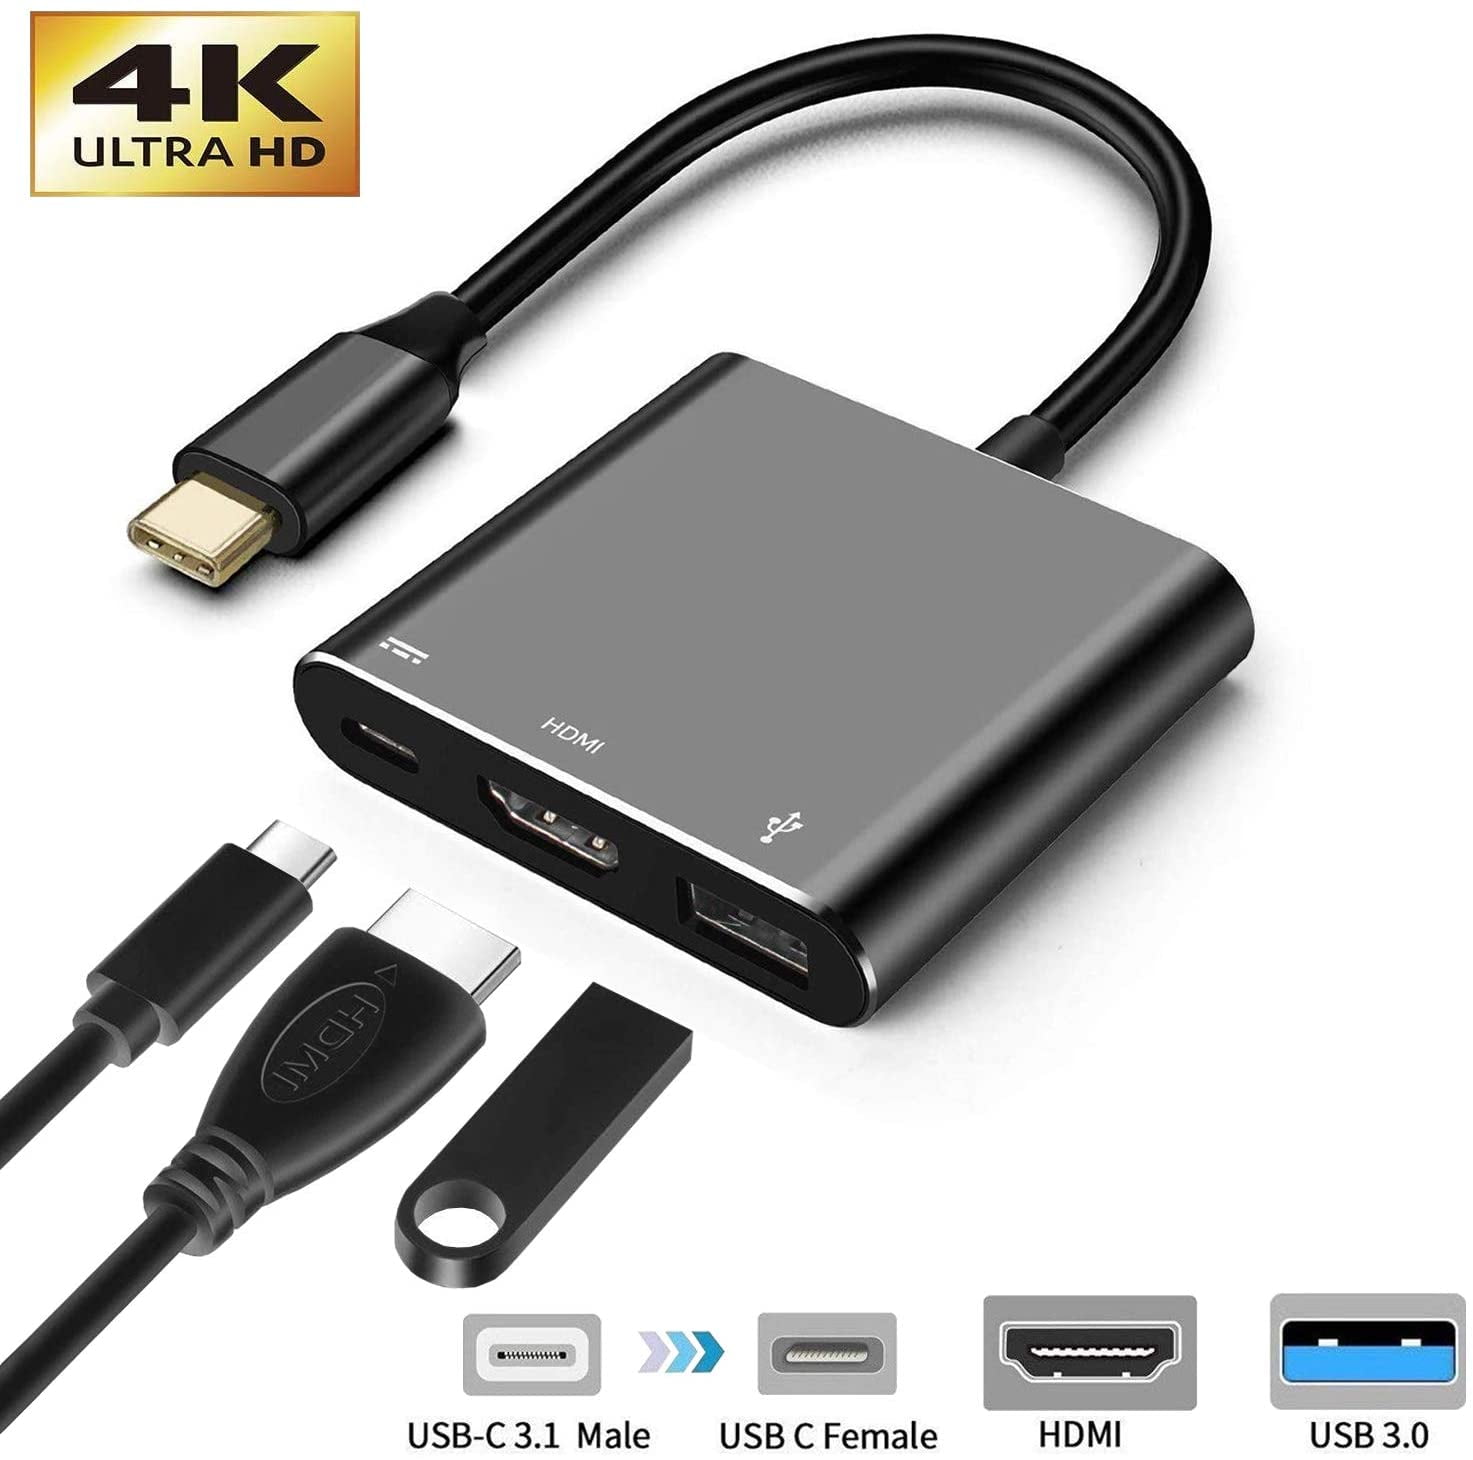 USB3.0 Power Supply Adapter Cable Cord USB 3.1 Type-C to HDMI 4k USB3.1 USB-C 